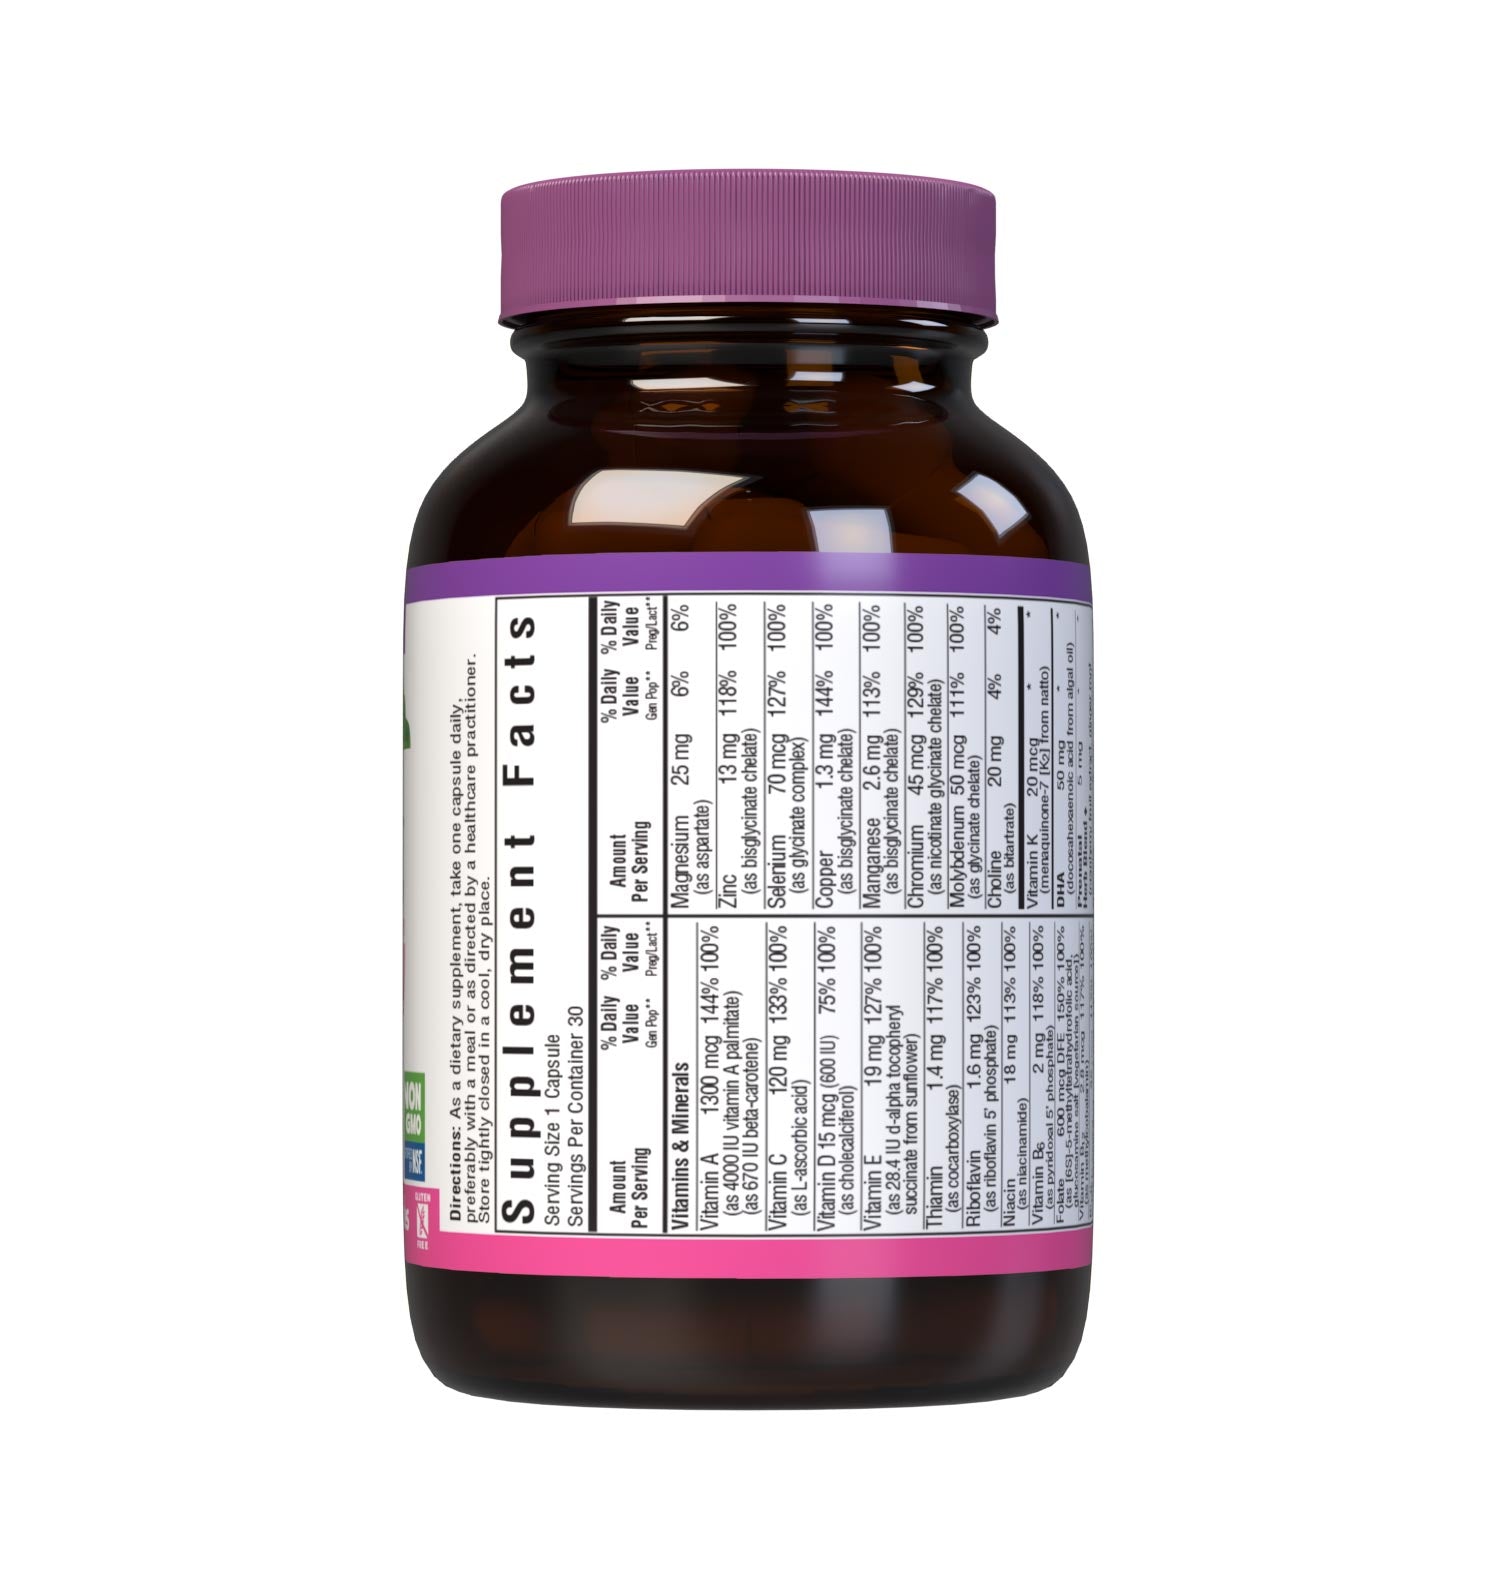 Bluebonnet’s Ladies’ ONE Prenatal Whole Food-Based Multiple 30 vegetable capsules provides daily nutritional support for women trying to conceive, pregnant or nursing in just one convenient capsule per serving. Delivers targeted nutrients for conception and fertility support, healthy pregnancy, proper baby growth and development, and lactation boost. Supplement facts panel top part. #size_30 count